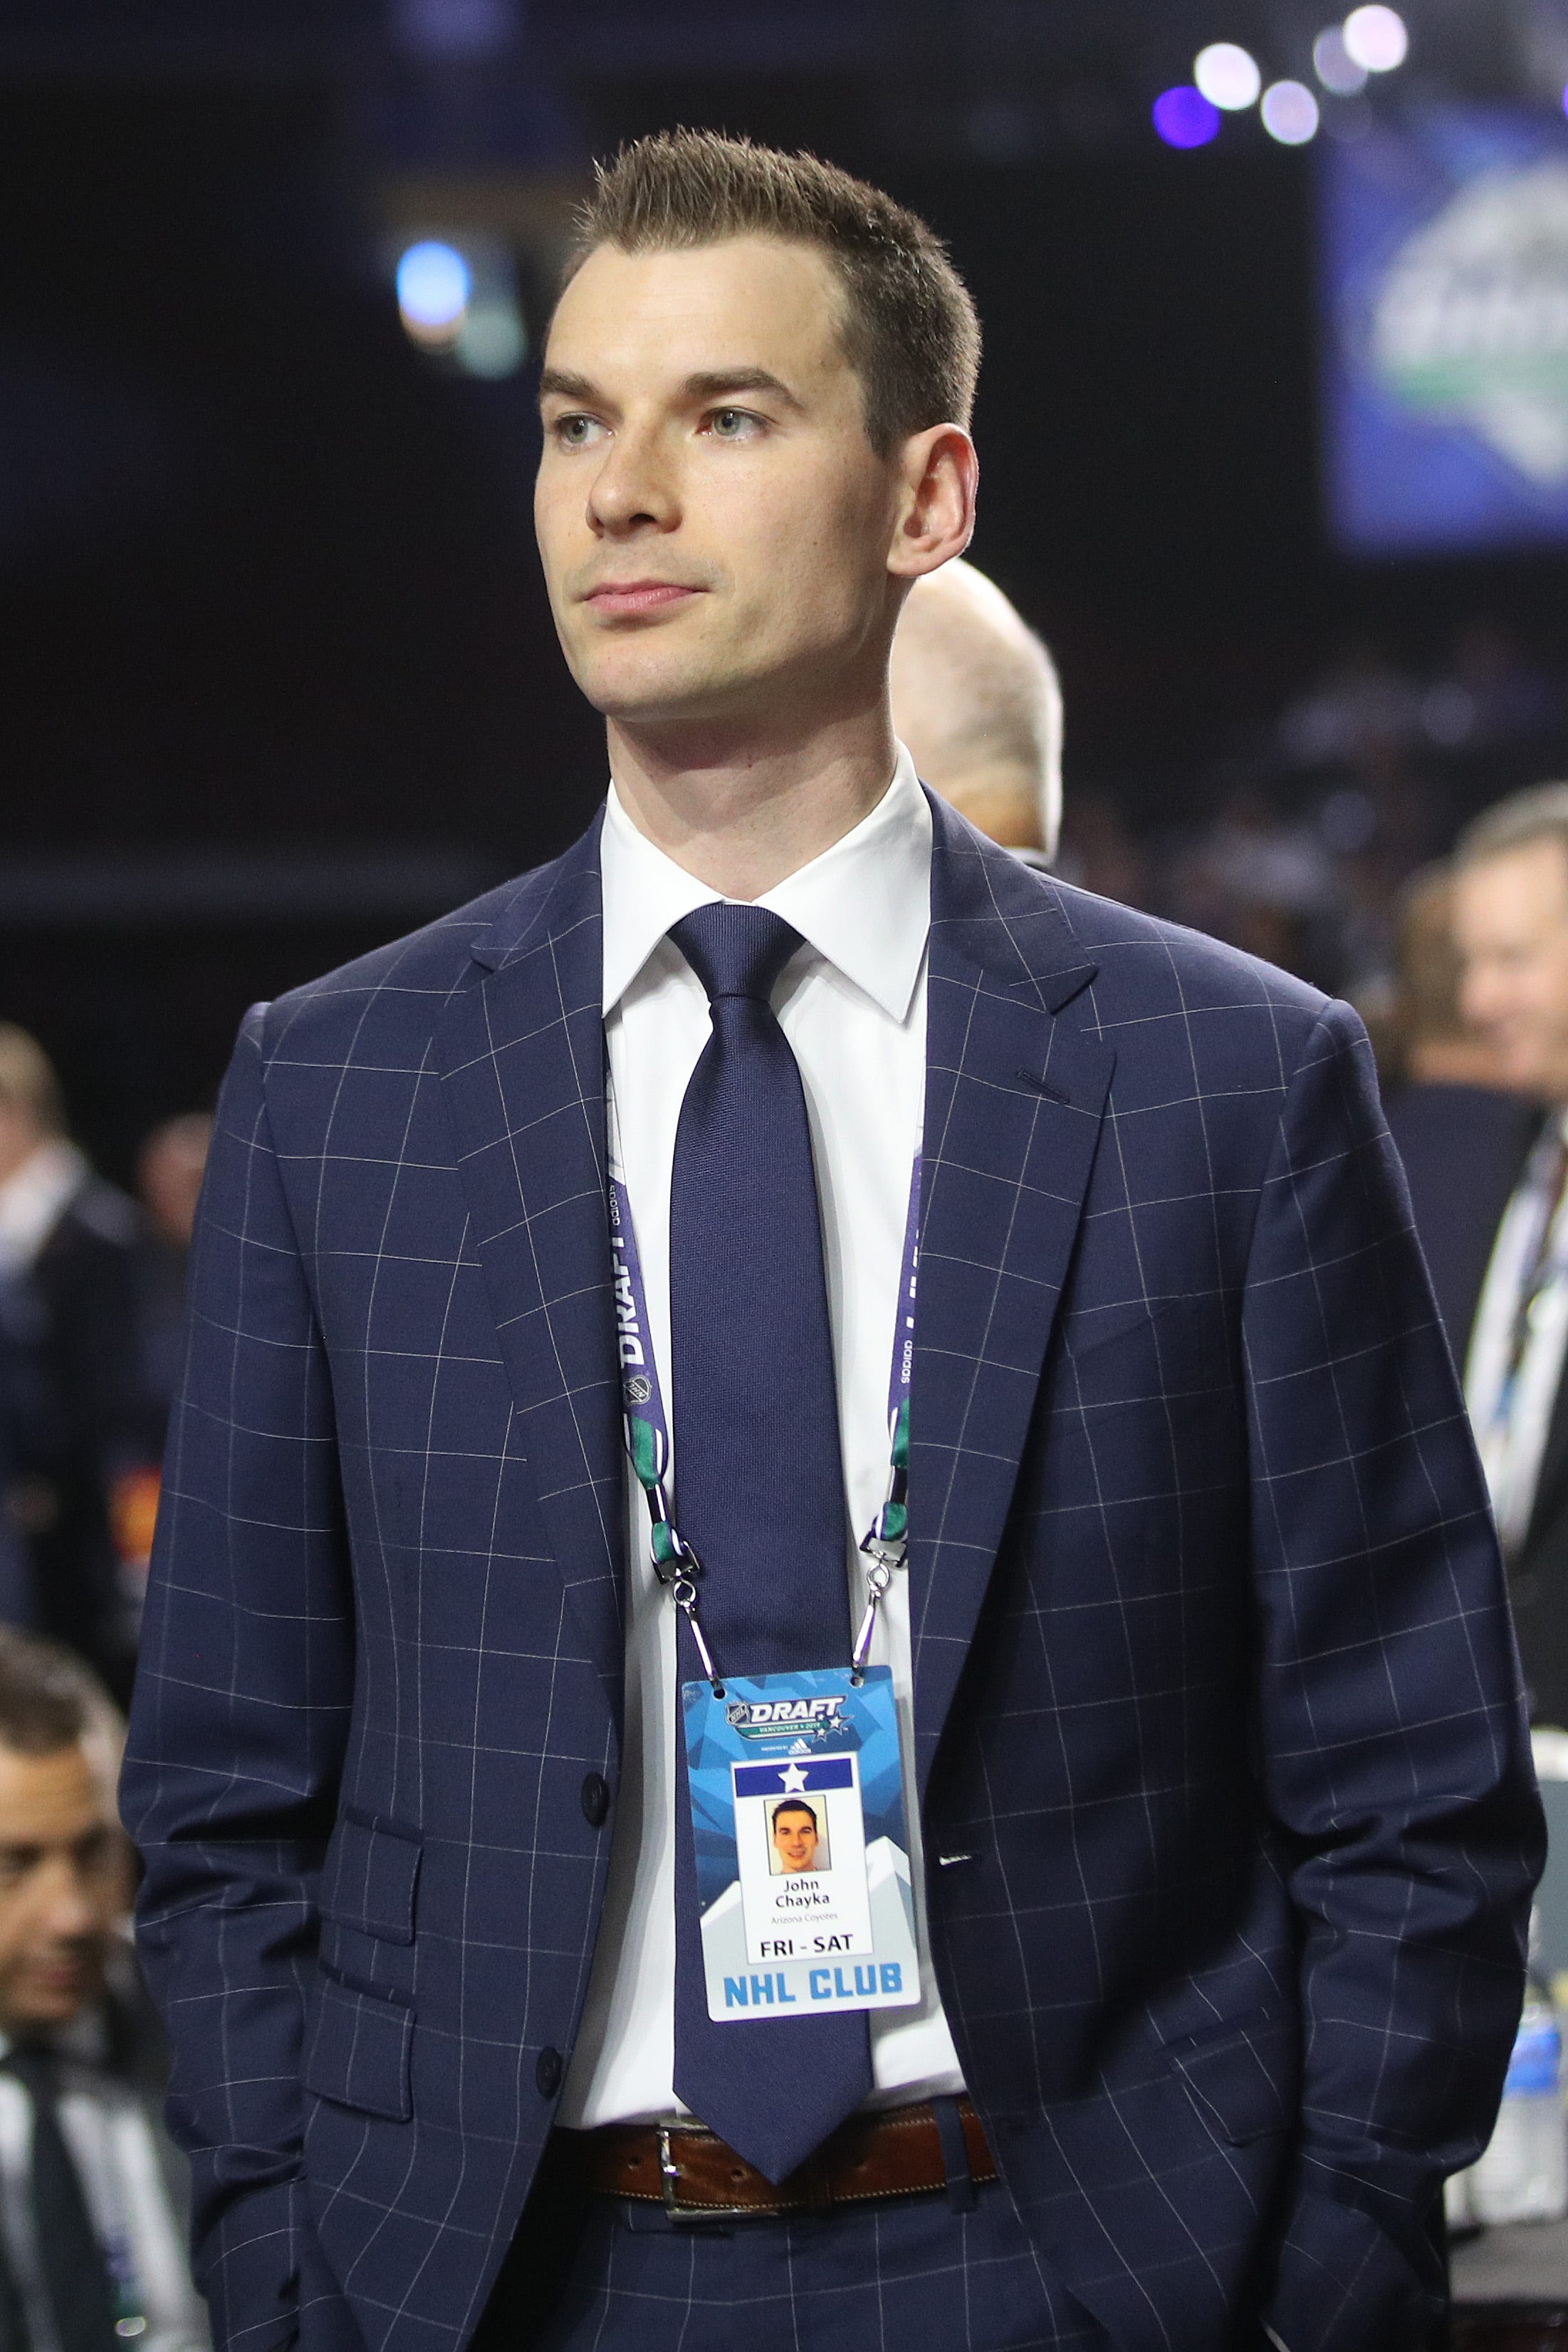 Former Coyotes GM John Chayka suspended from NHL through 2021, reports say